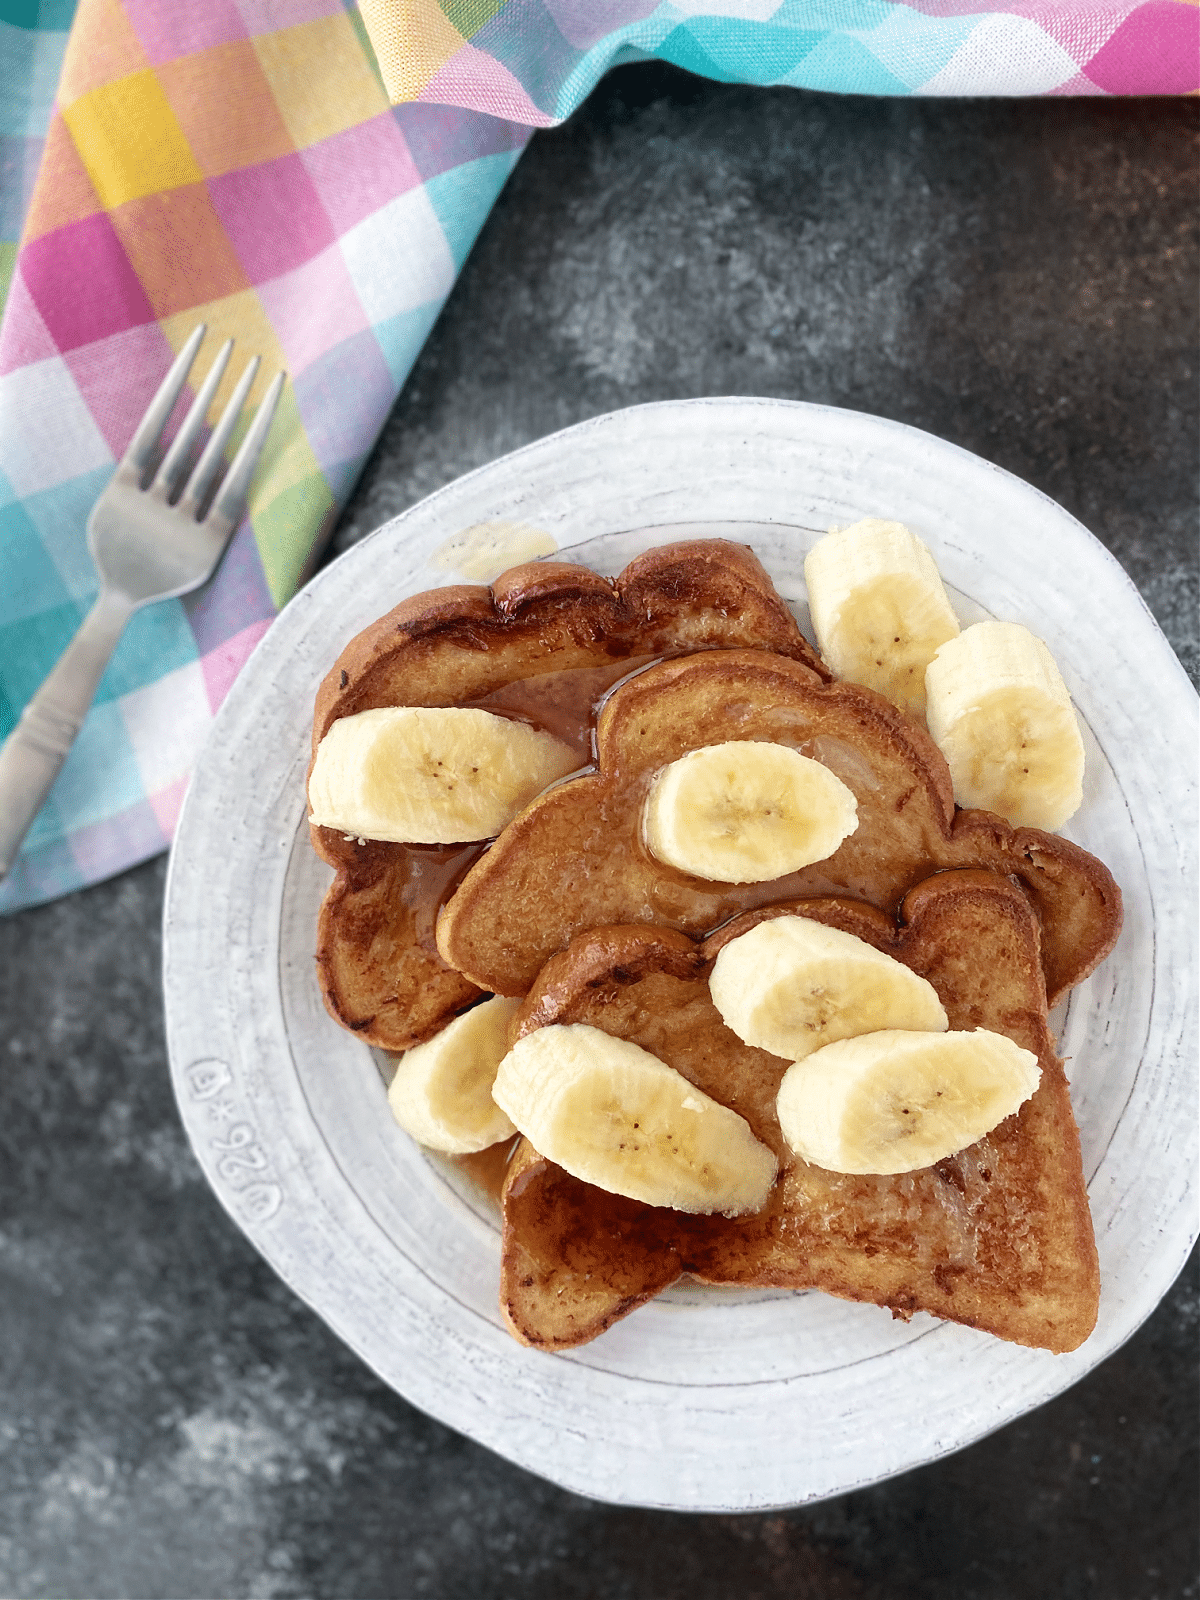 Overhead view of a stack of three slices of Baileys Irish cream French toast on a rustic white plate. French toast is garnished with sliced banana and maple syrup.